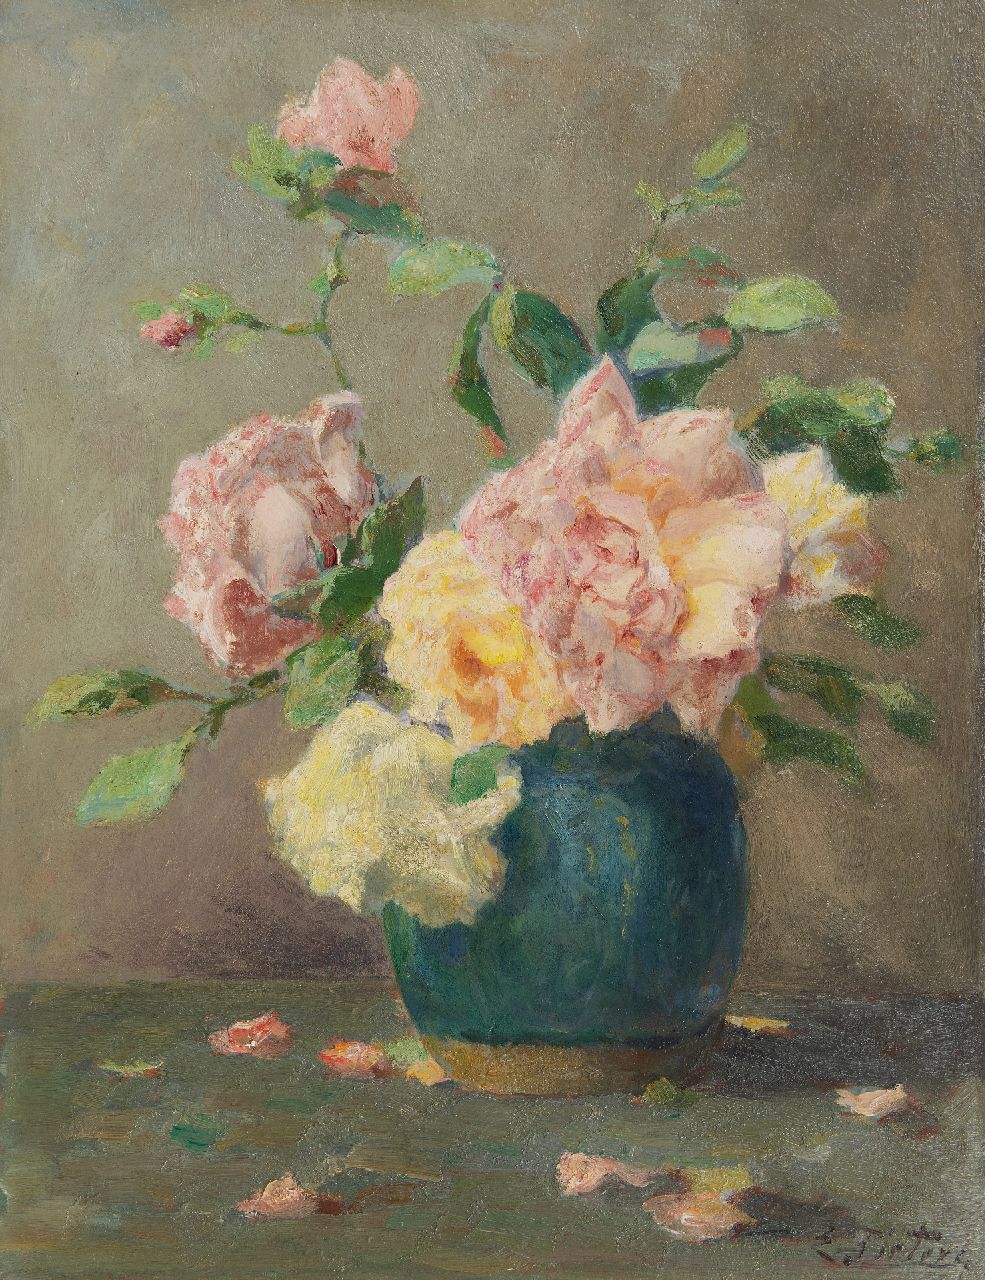 Pieters E.  | Evert Pieters | Paintings offered for sale | Green pot with roses, oil on panel 40.9 x 31.7 cm, signed l.r.